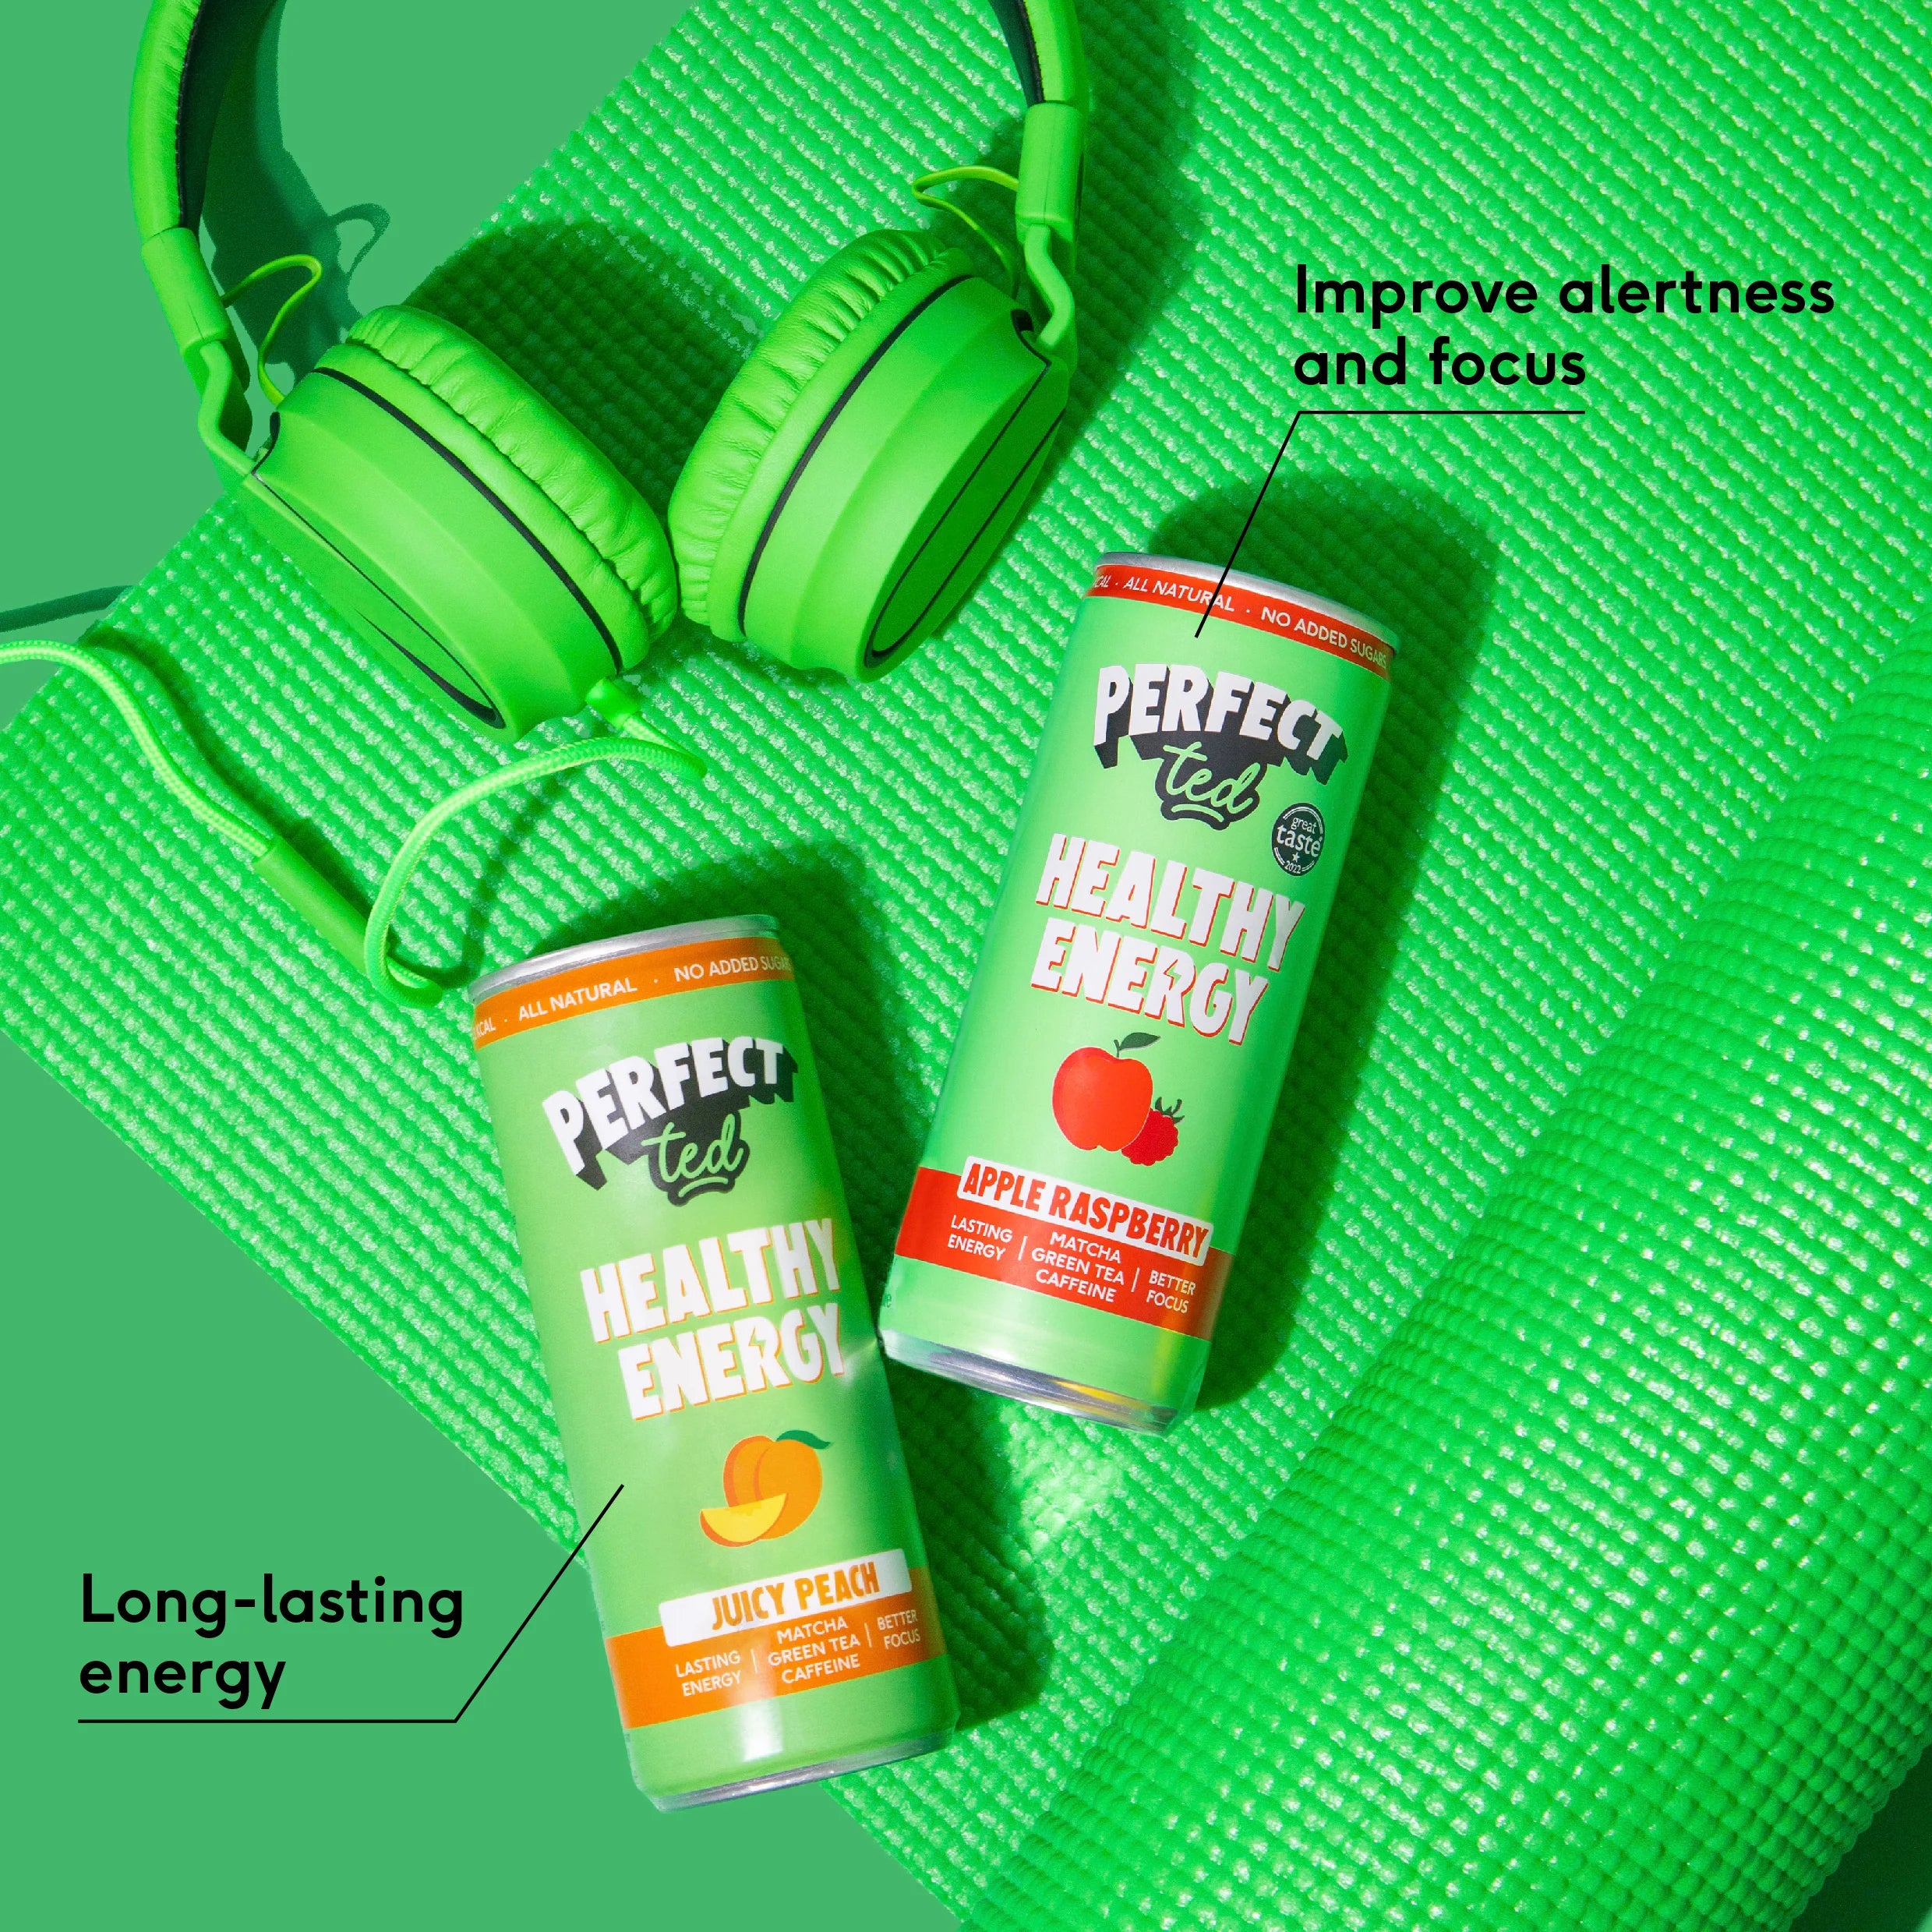 PerfectTed Healthy Energy key info 